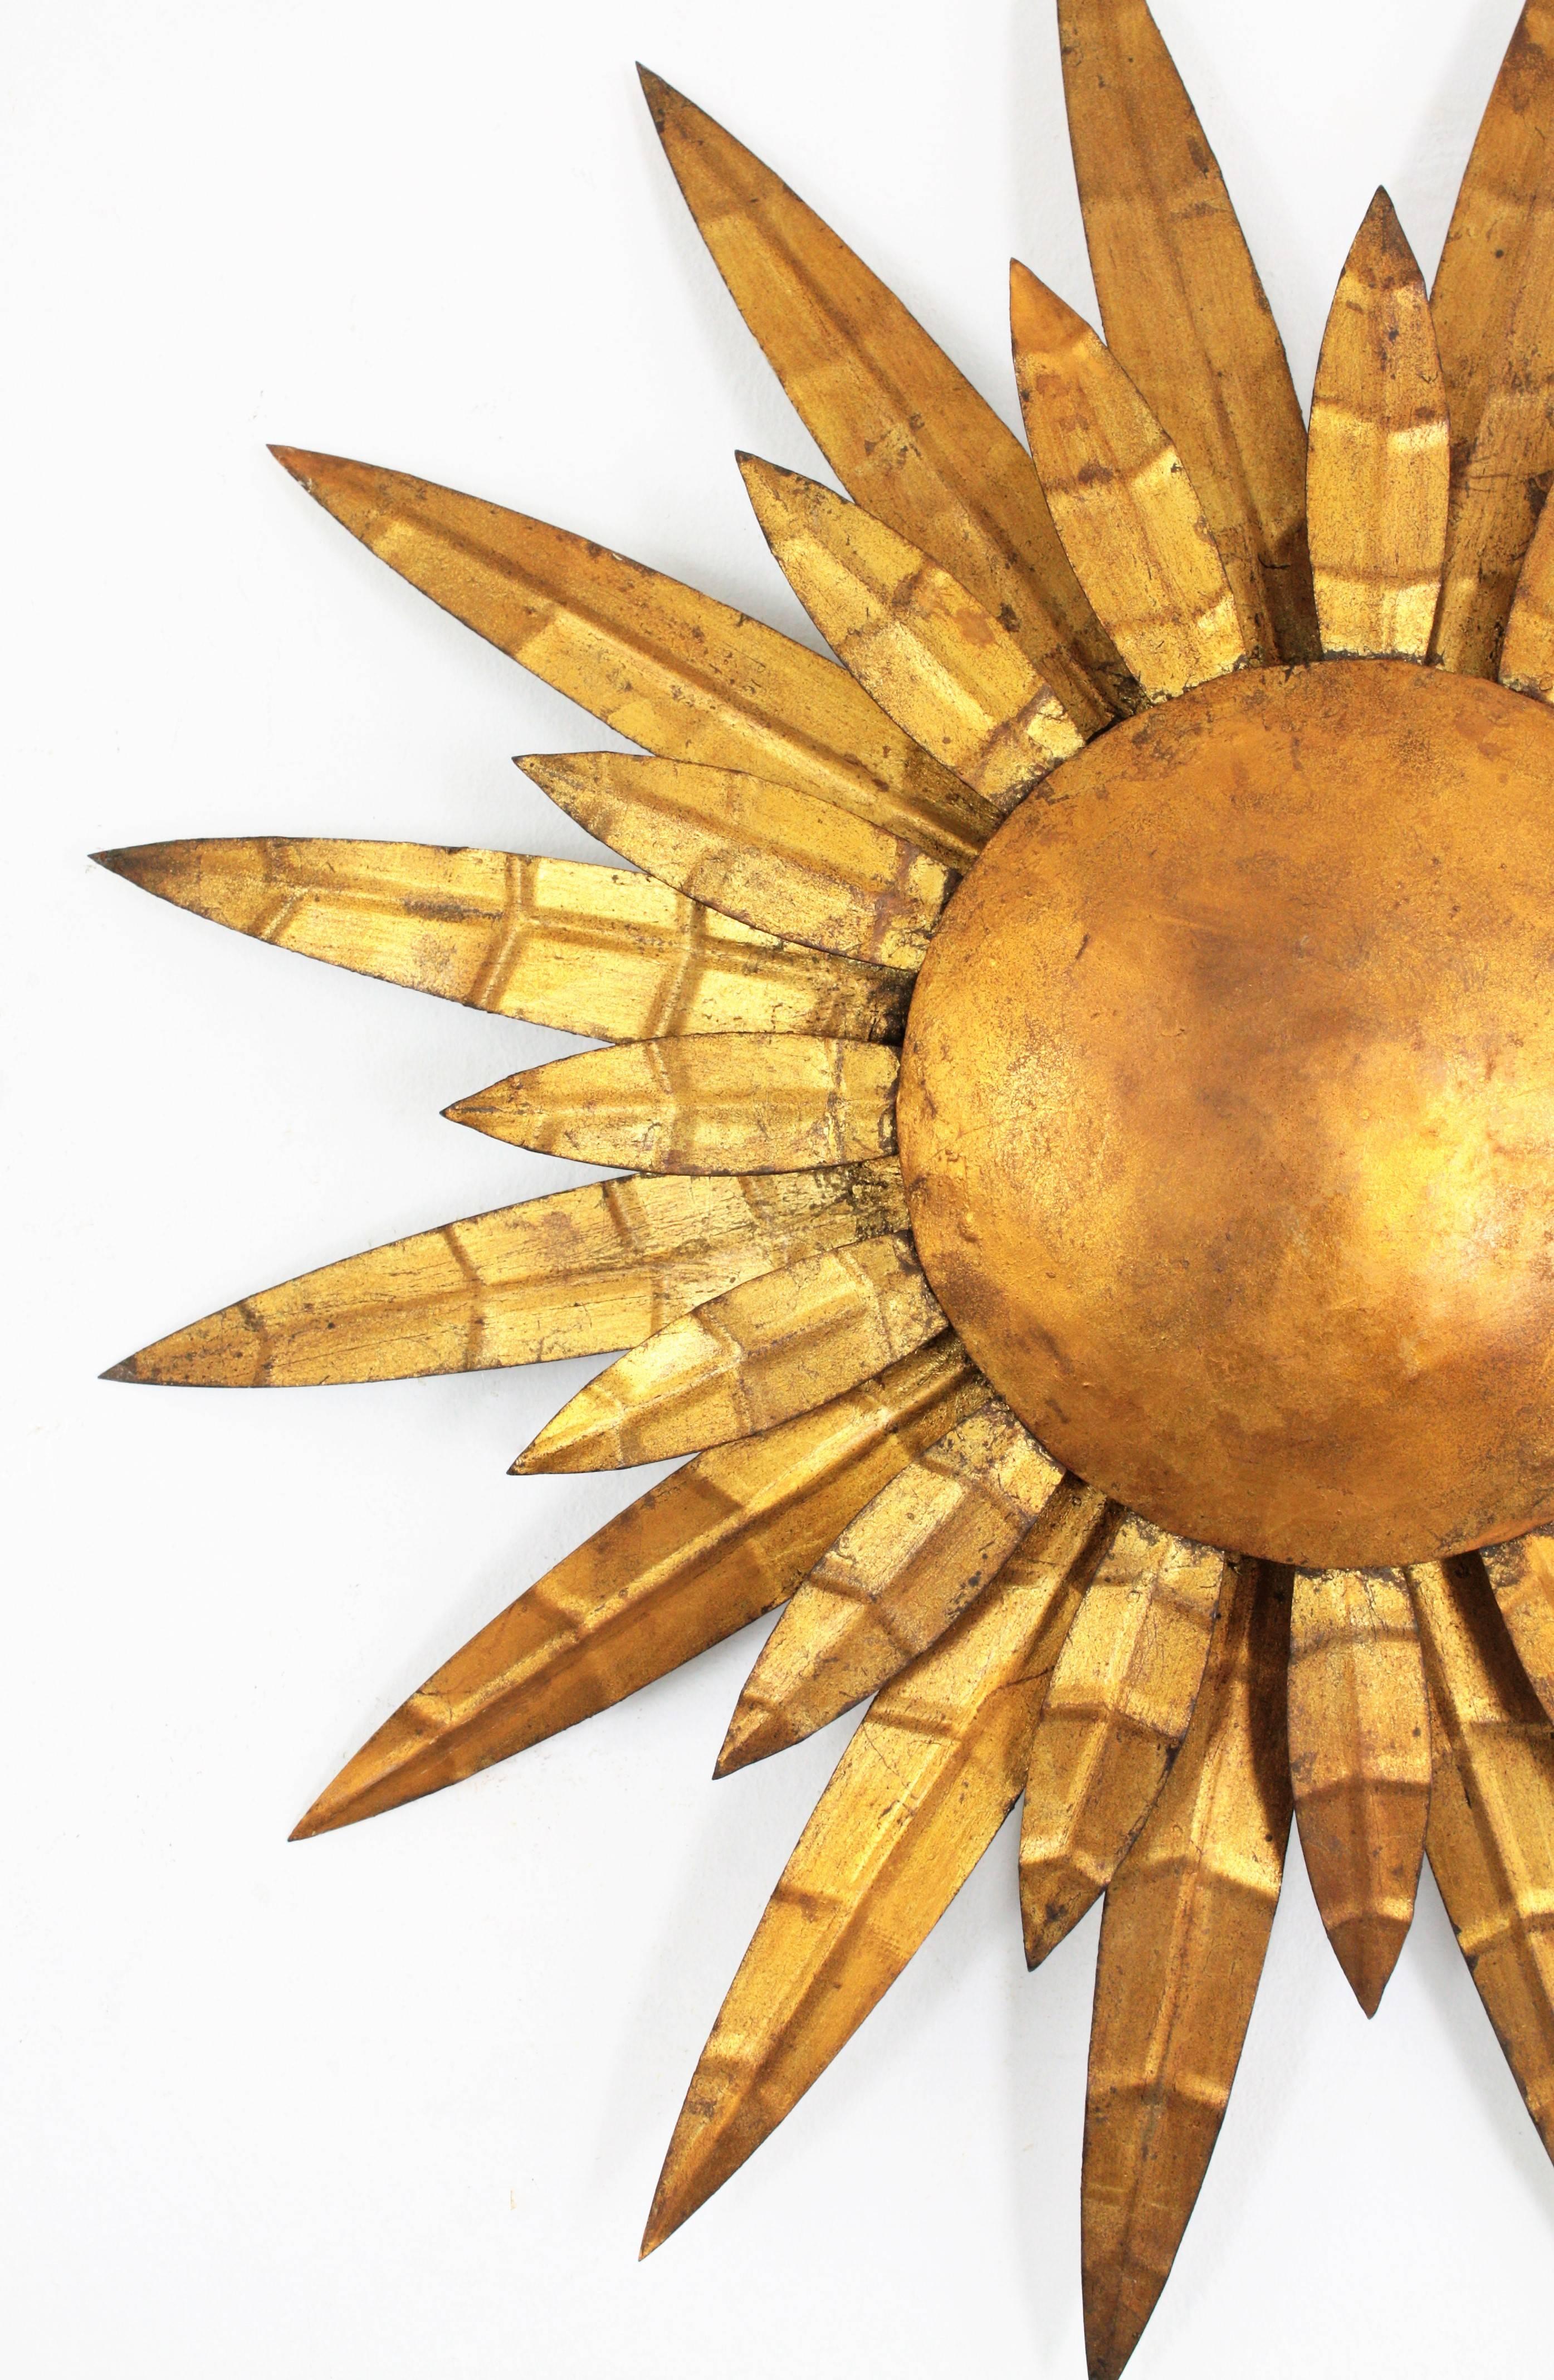 Beautiful two layered gilt iron sunburst wall decoration, wall sconce or ceiling light fixture. A hand-hammered piece with engraved details on its beams or leaves and gold leaf finish.
Its sunburst or sunflower shape is highly decorative.

France,